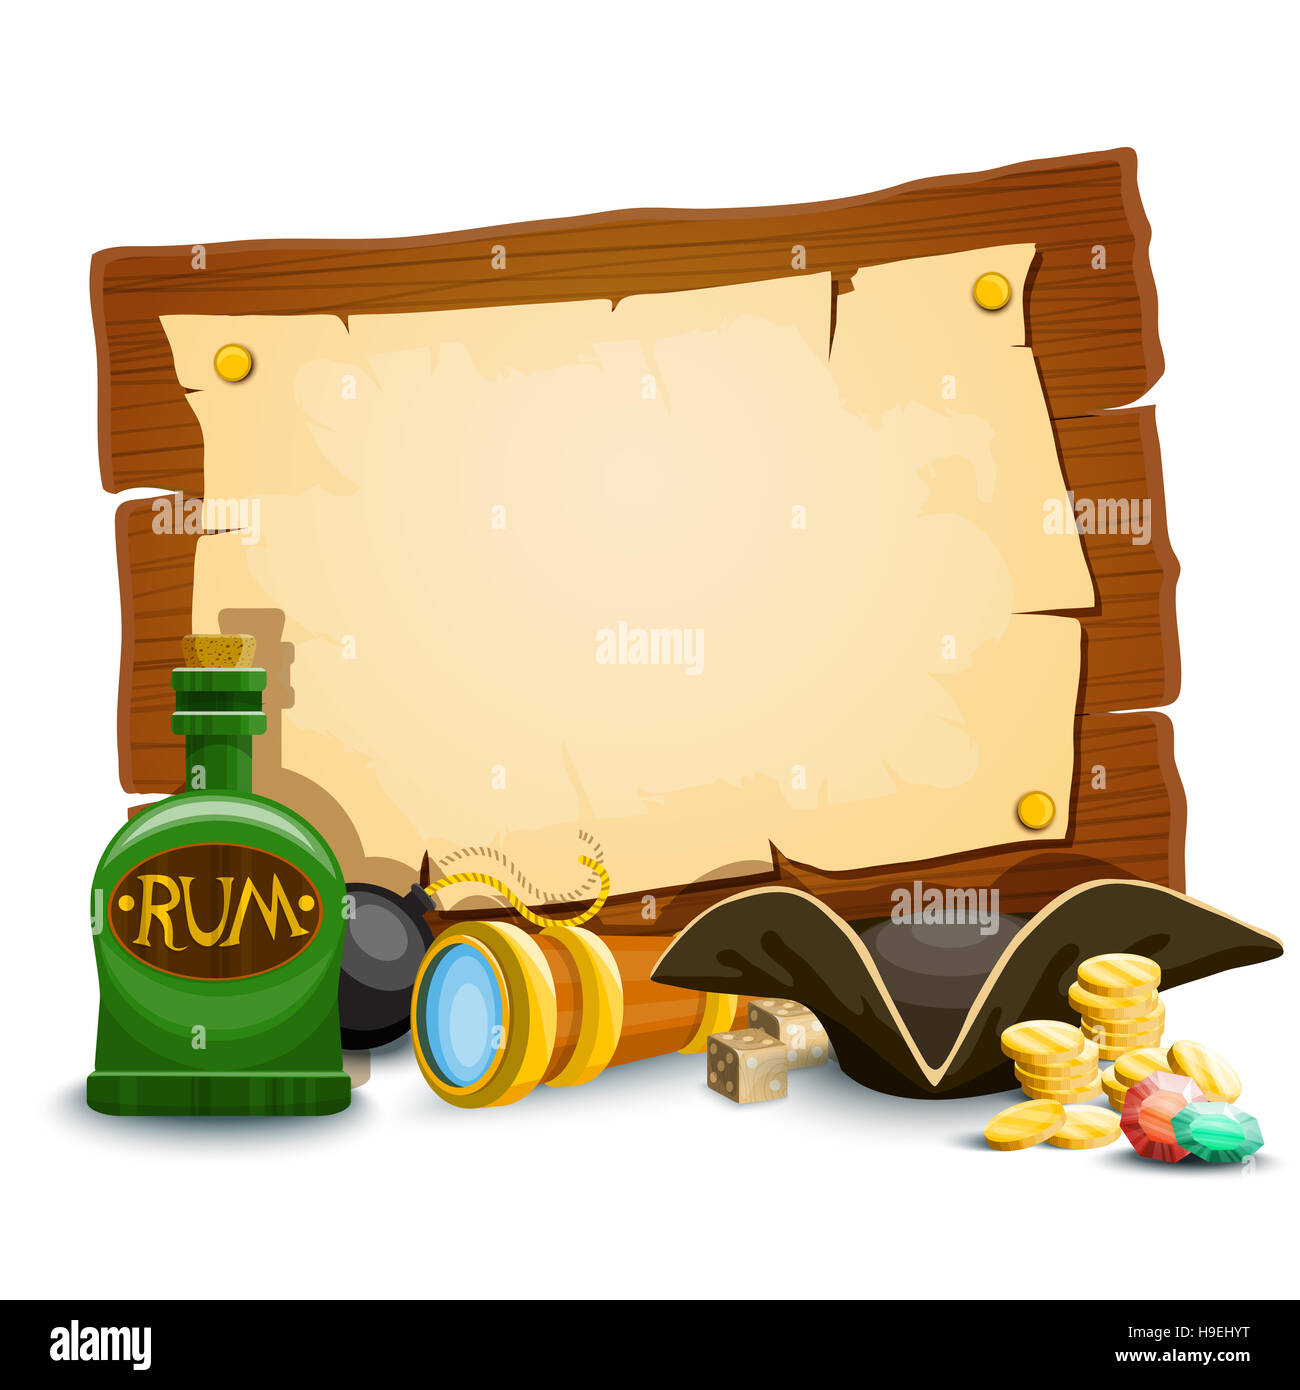 Pirate illustration. Set with wood poster and old paper, coins and other objects Stock Photo